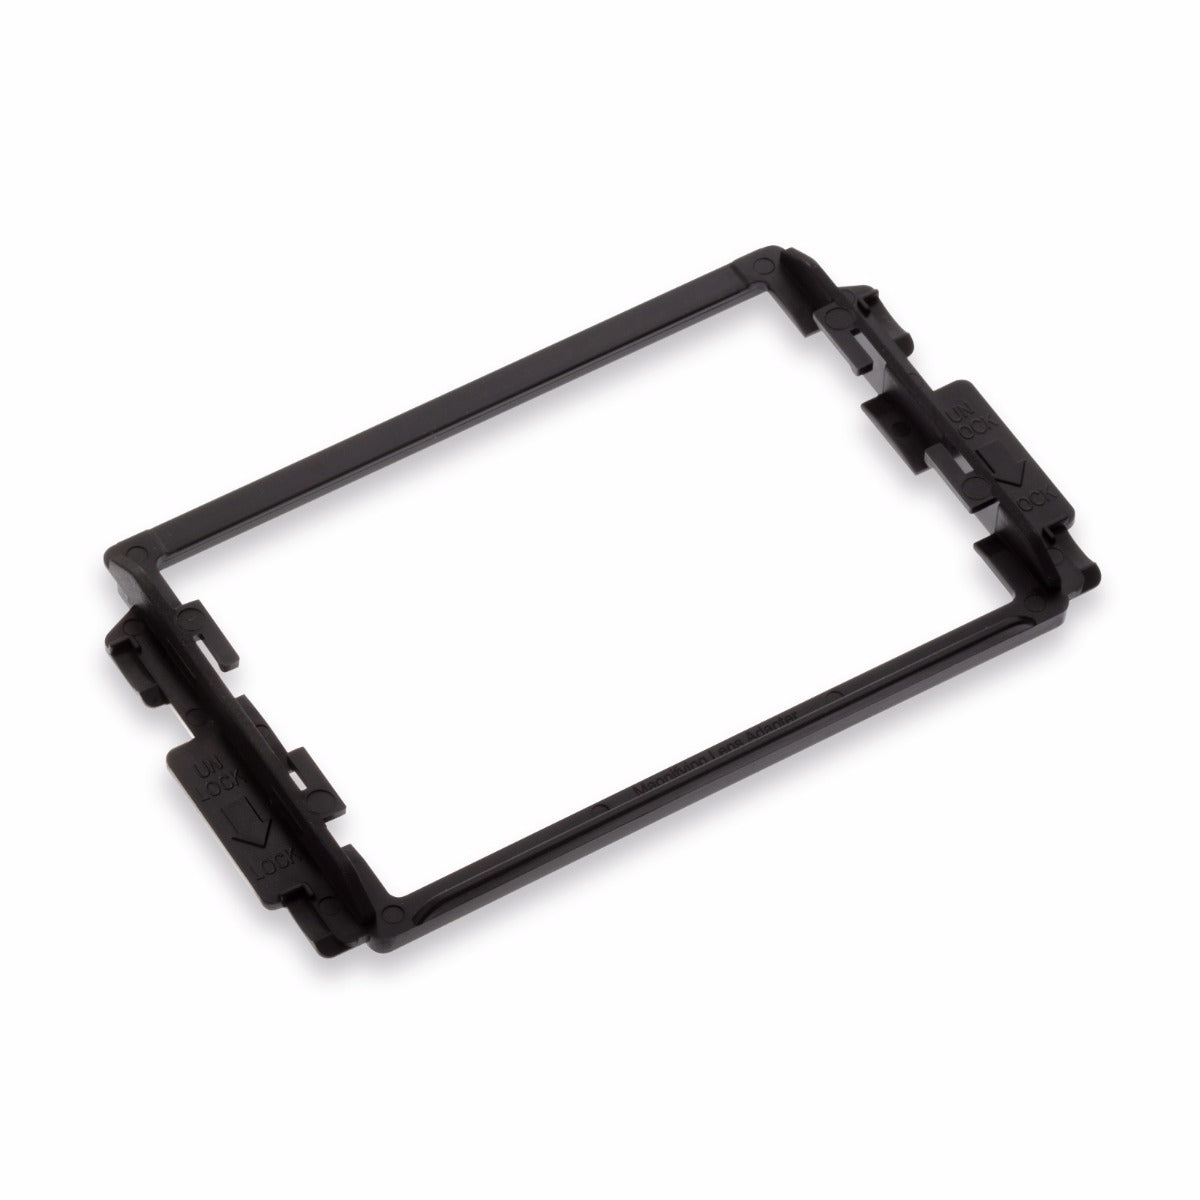 Miller Digital Infinity Mag Lens Adapter for sale (271328) But at ...